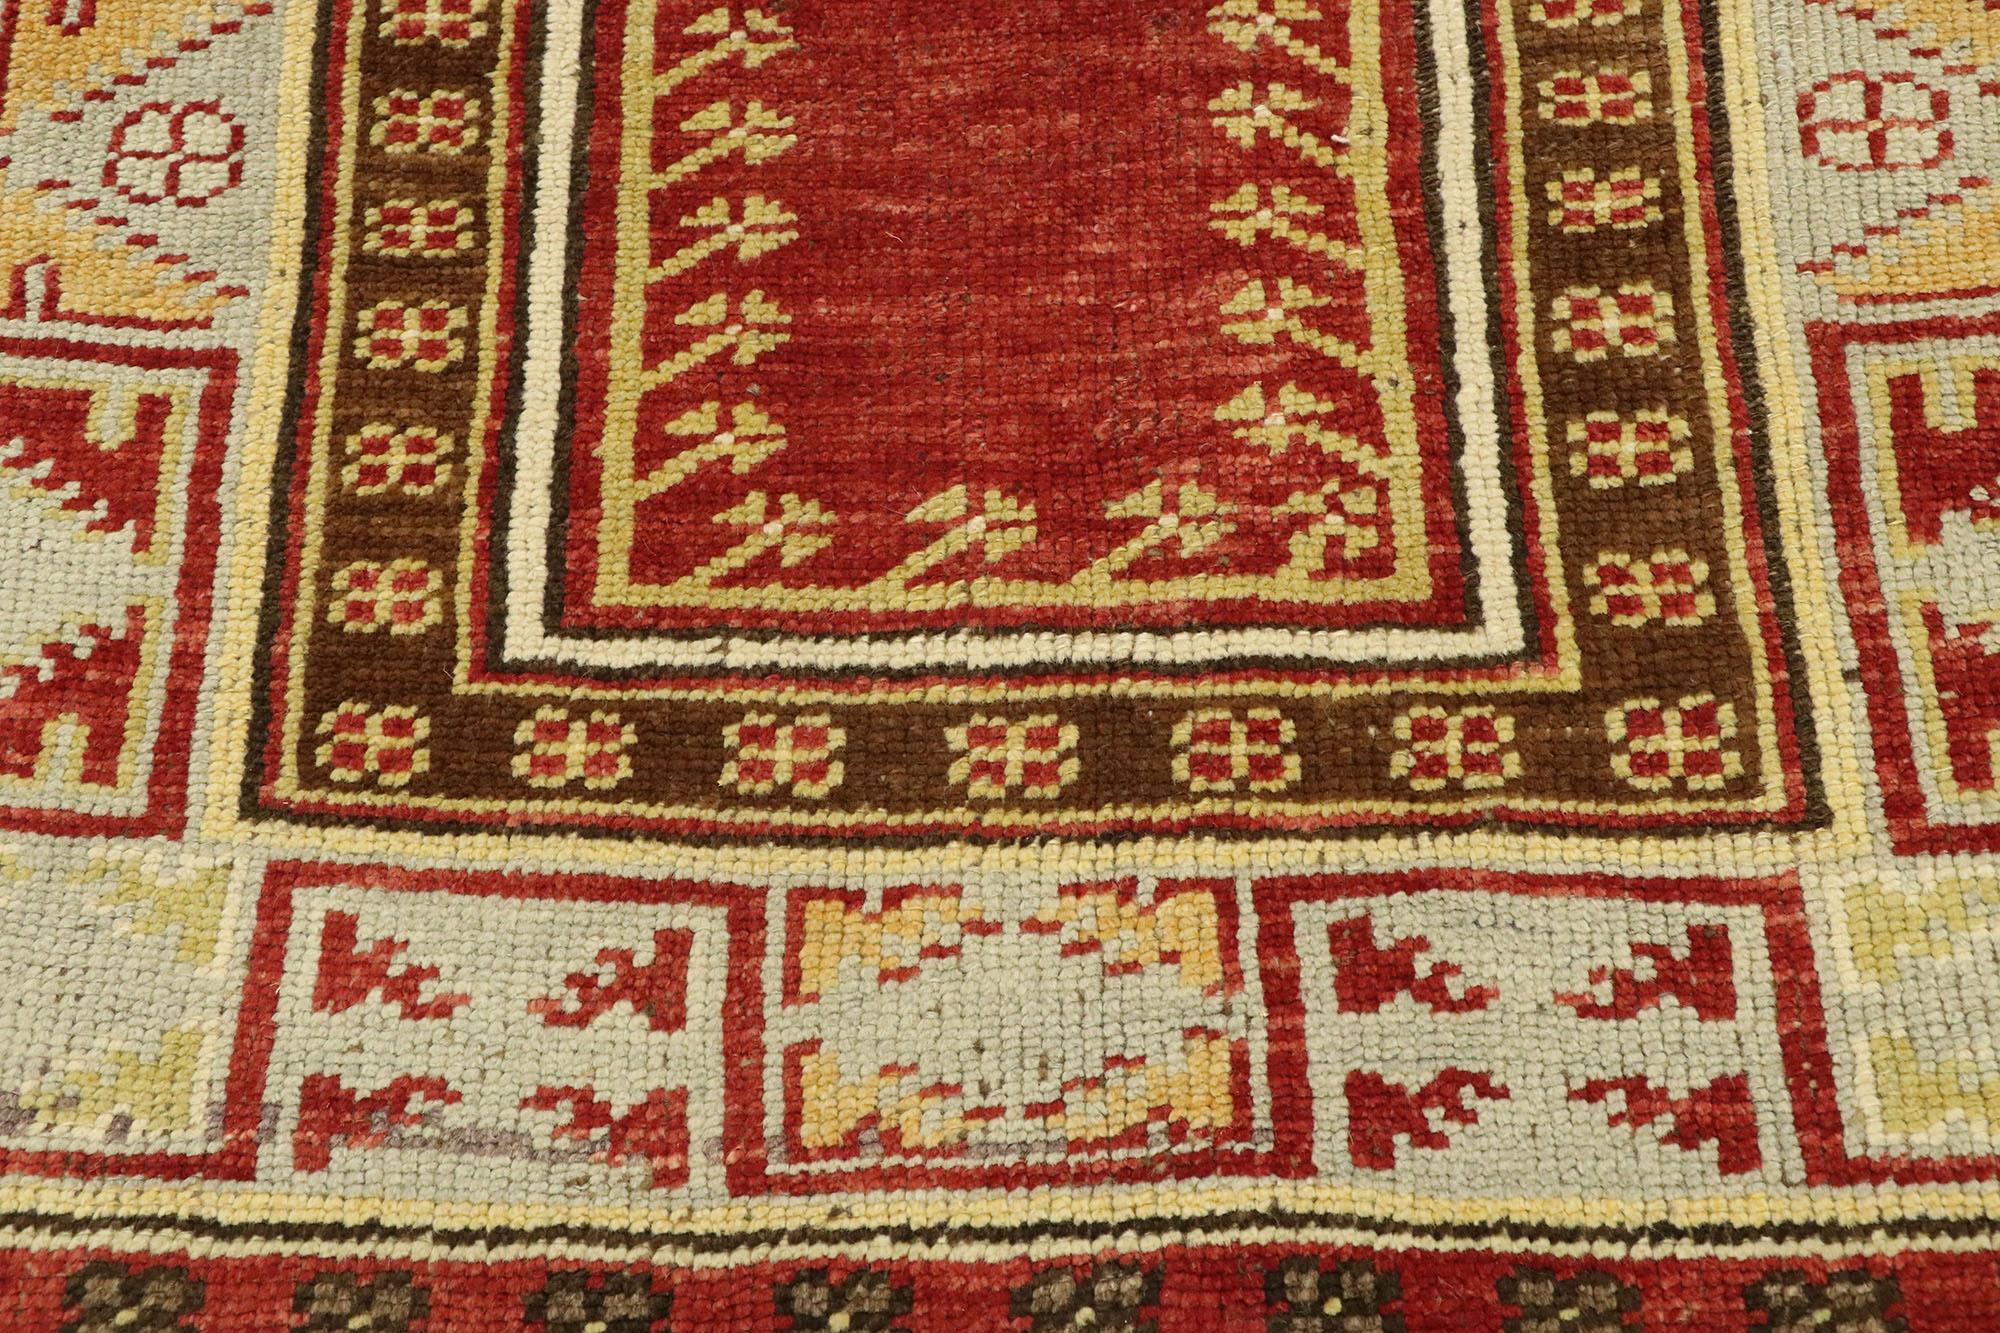 Vintage Turkish Oushak Prayer Rug In Good Condition For Sale In Dallas, TX